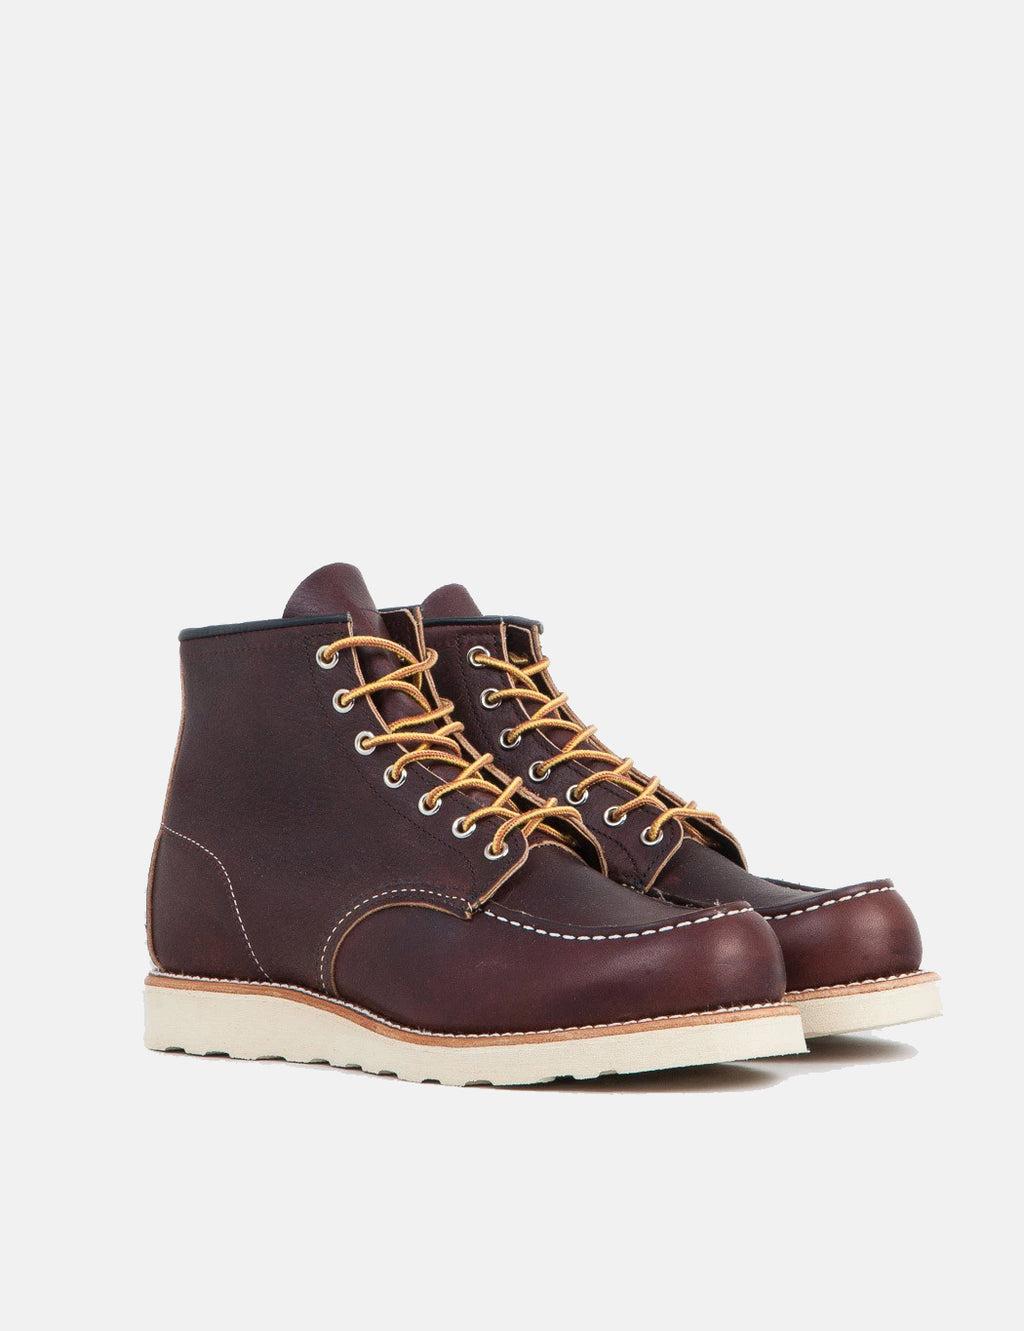 red wing boots 8138